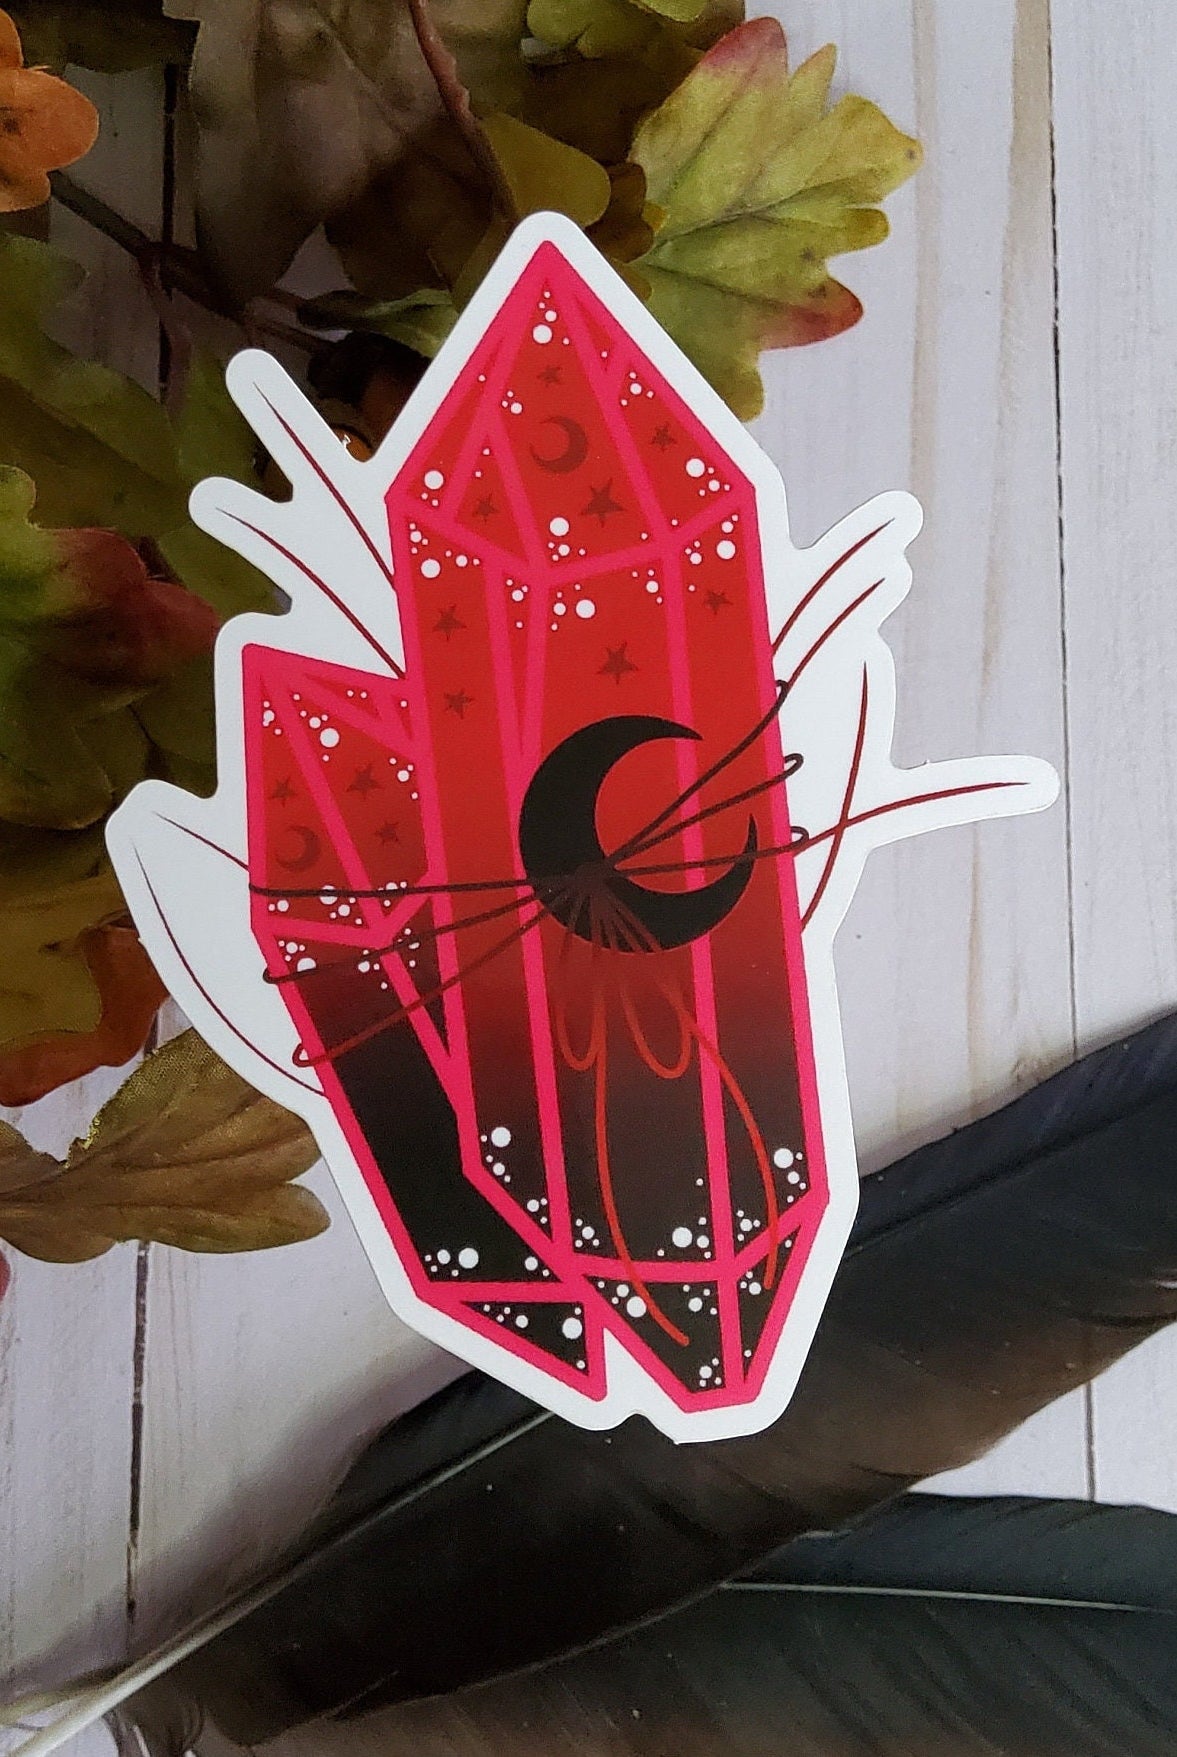 GLOSSY STICKER: Black and Red Moon Crystal , Crystal Sticker , Red and Black Crystal Moon Sticker , Red Crystal Stickers , Black Crystal